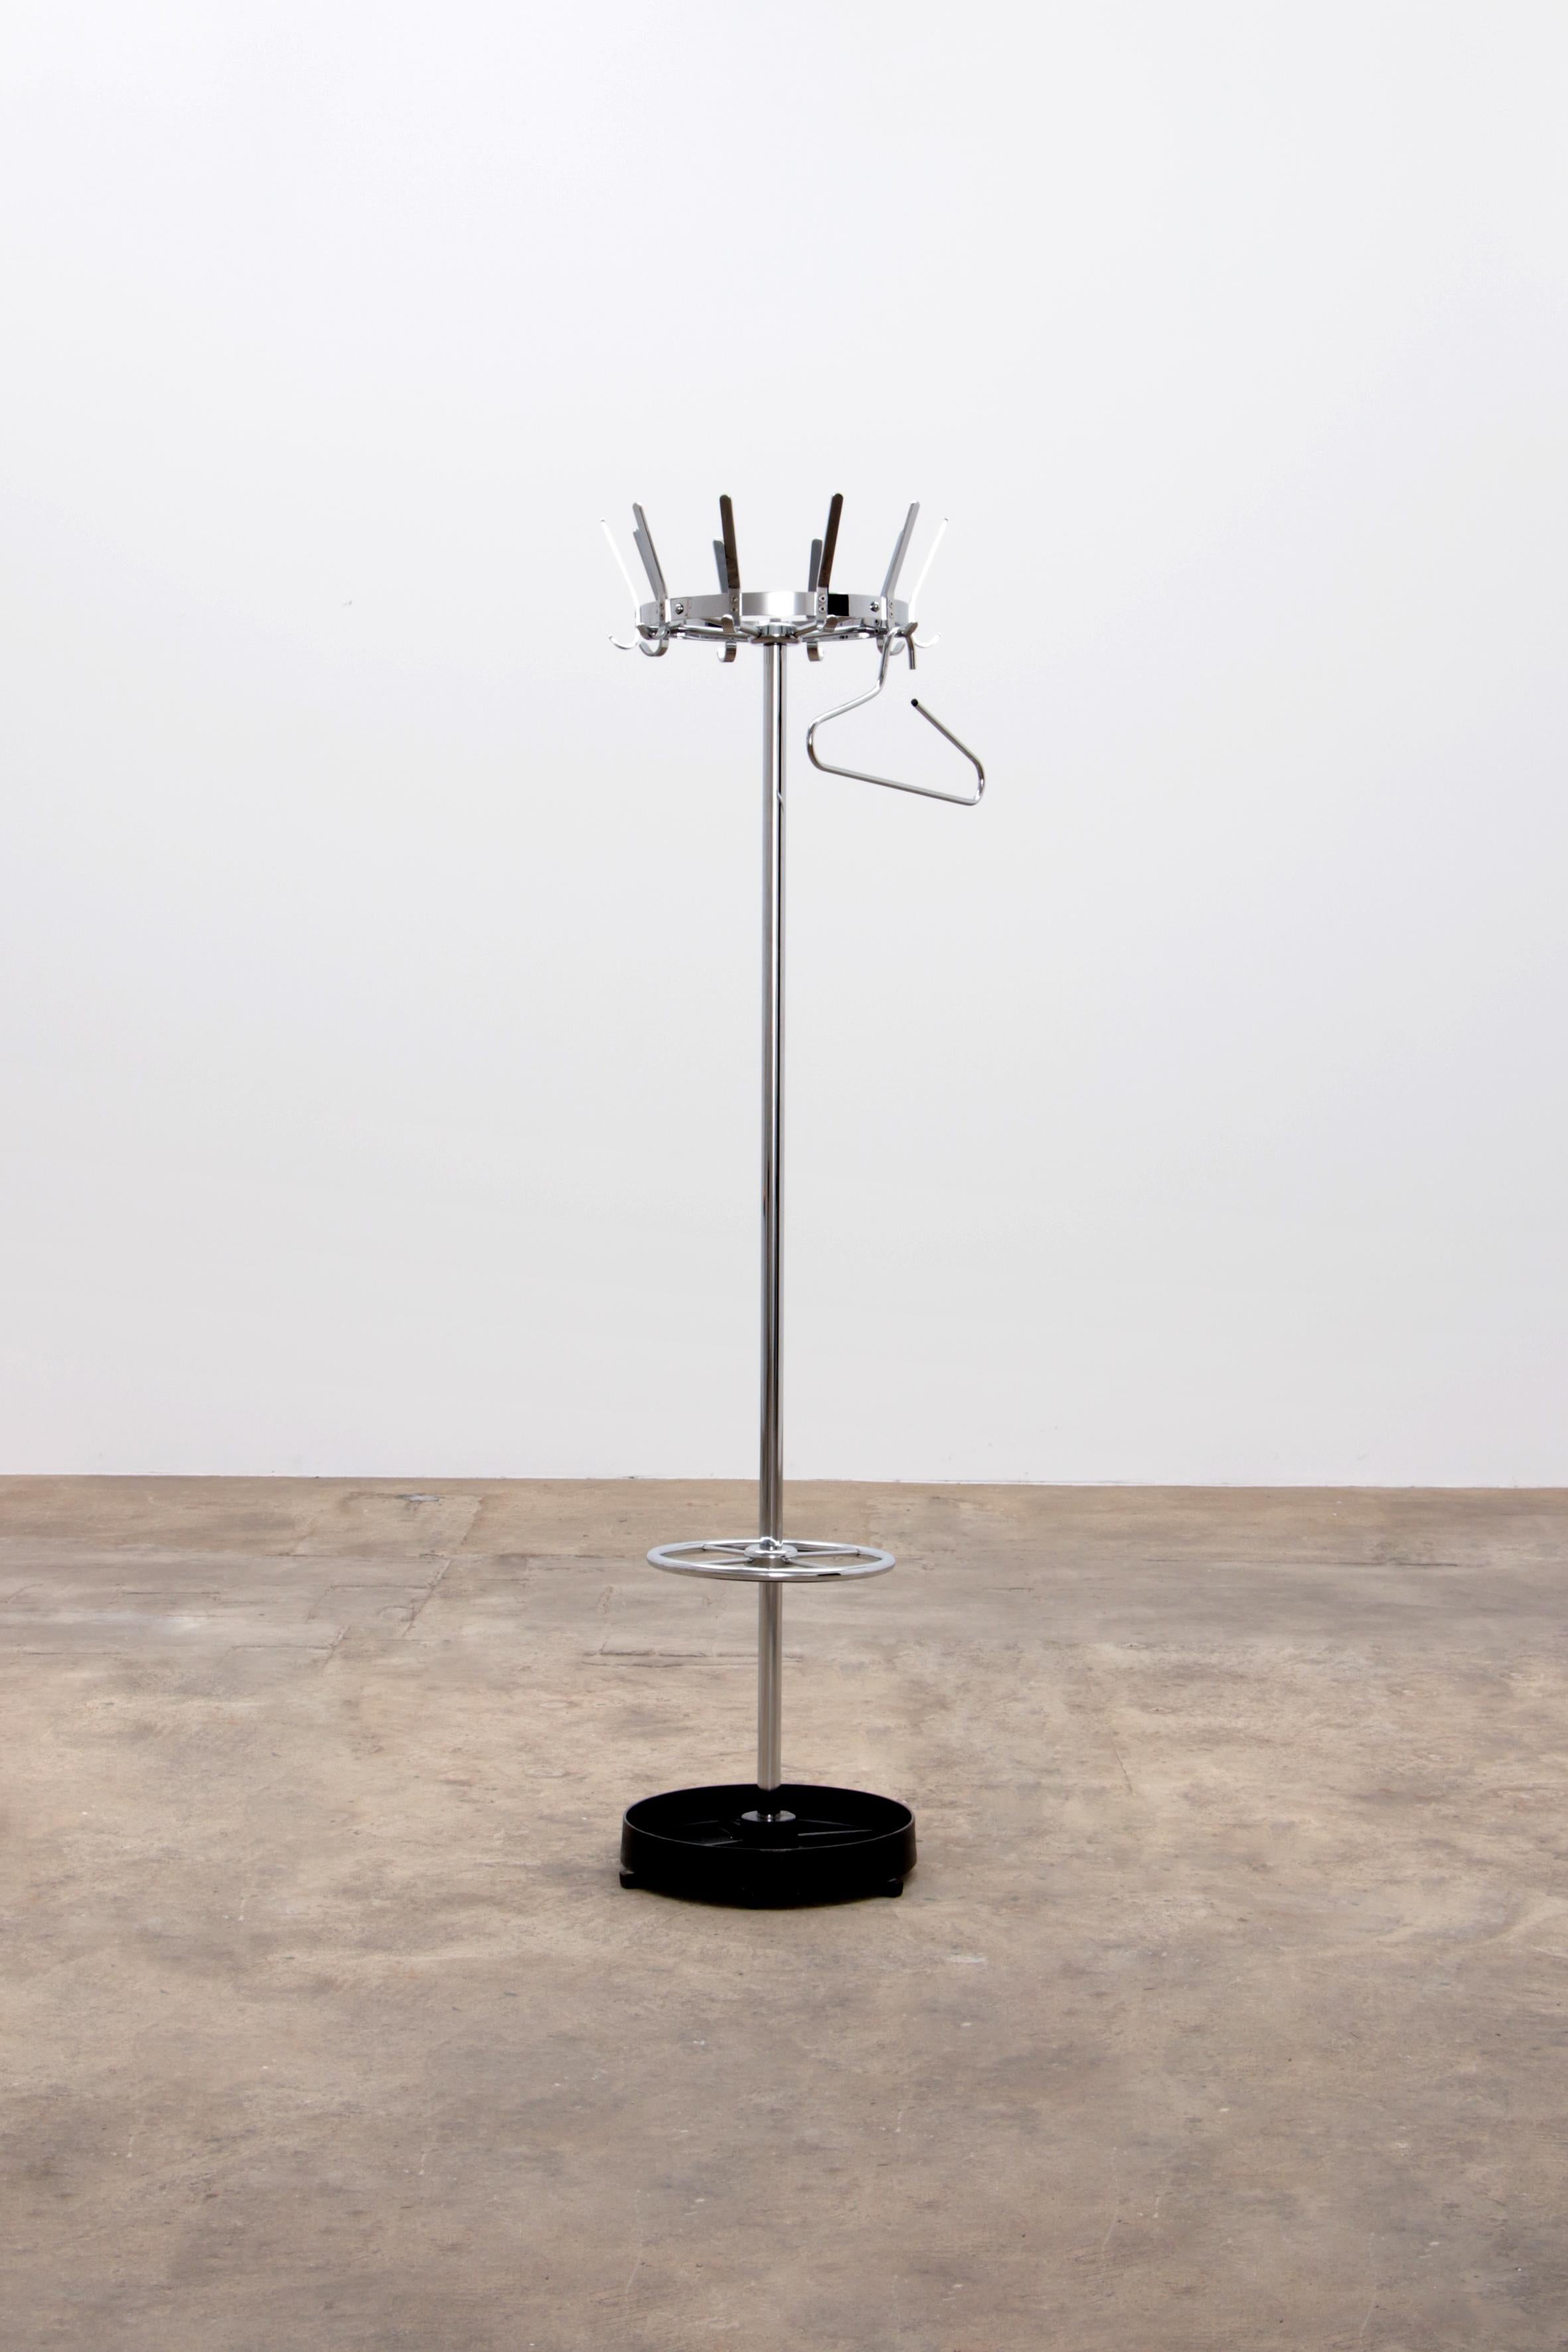 If you are looking for a beautiful eye-catcher for your hallway, you have certainly found it with this coat rack.

This is a coat rack made of metal and chrome with a base that doubles as a handy umbrella stand. The crown of the coat rack has 9